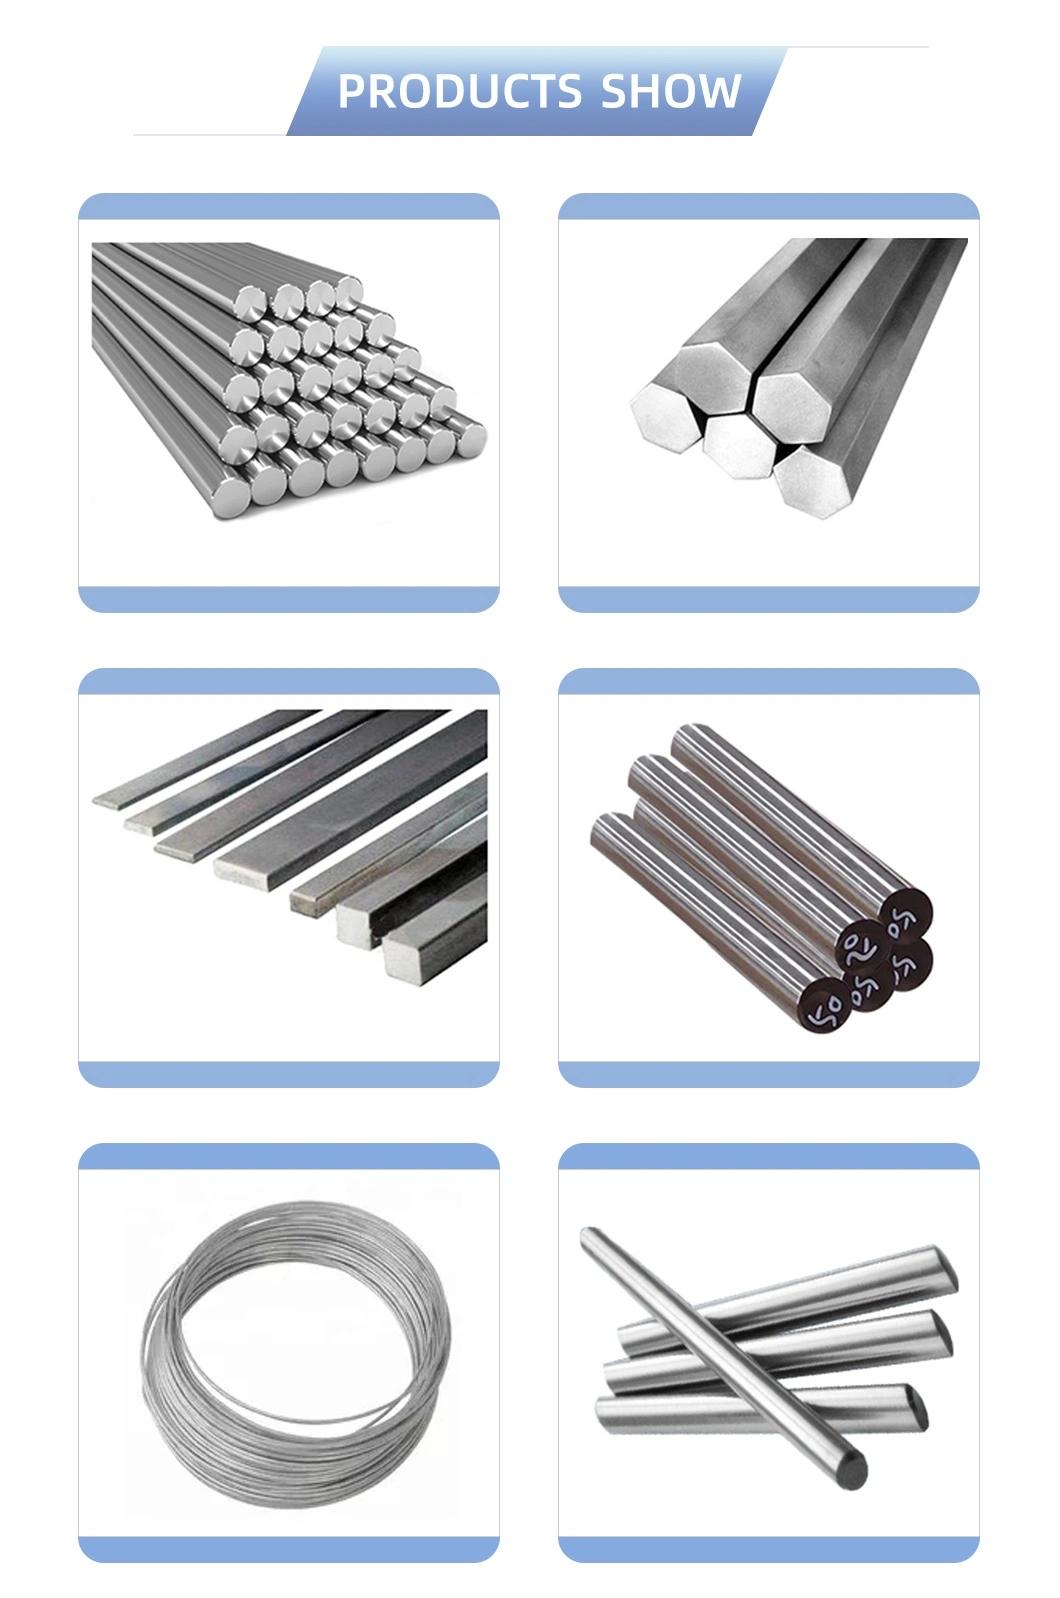 Cold Drawn/Hot Rolled Galvanized/Carbon/ Stainless Steel Round /Flat/Square/Angle/Channel Bar Price